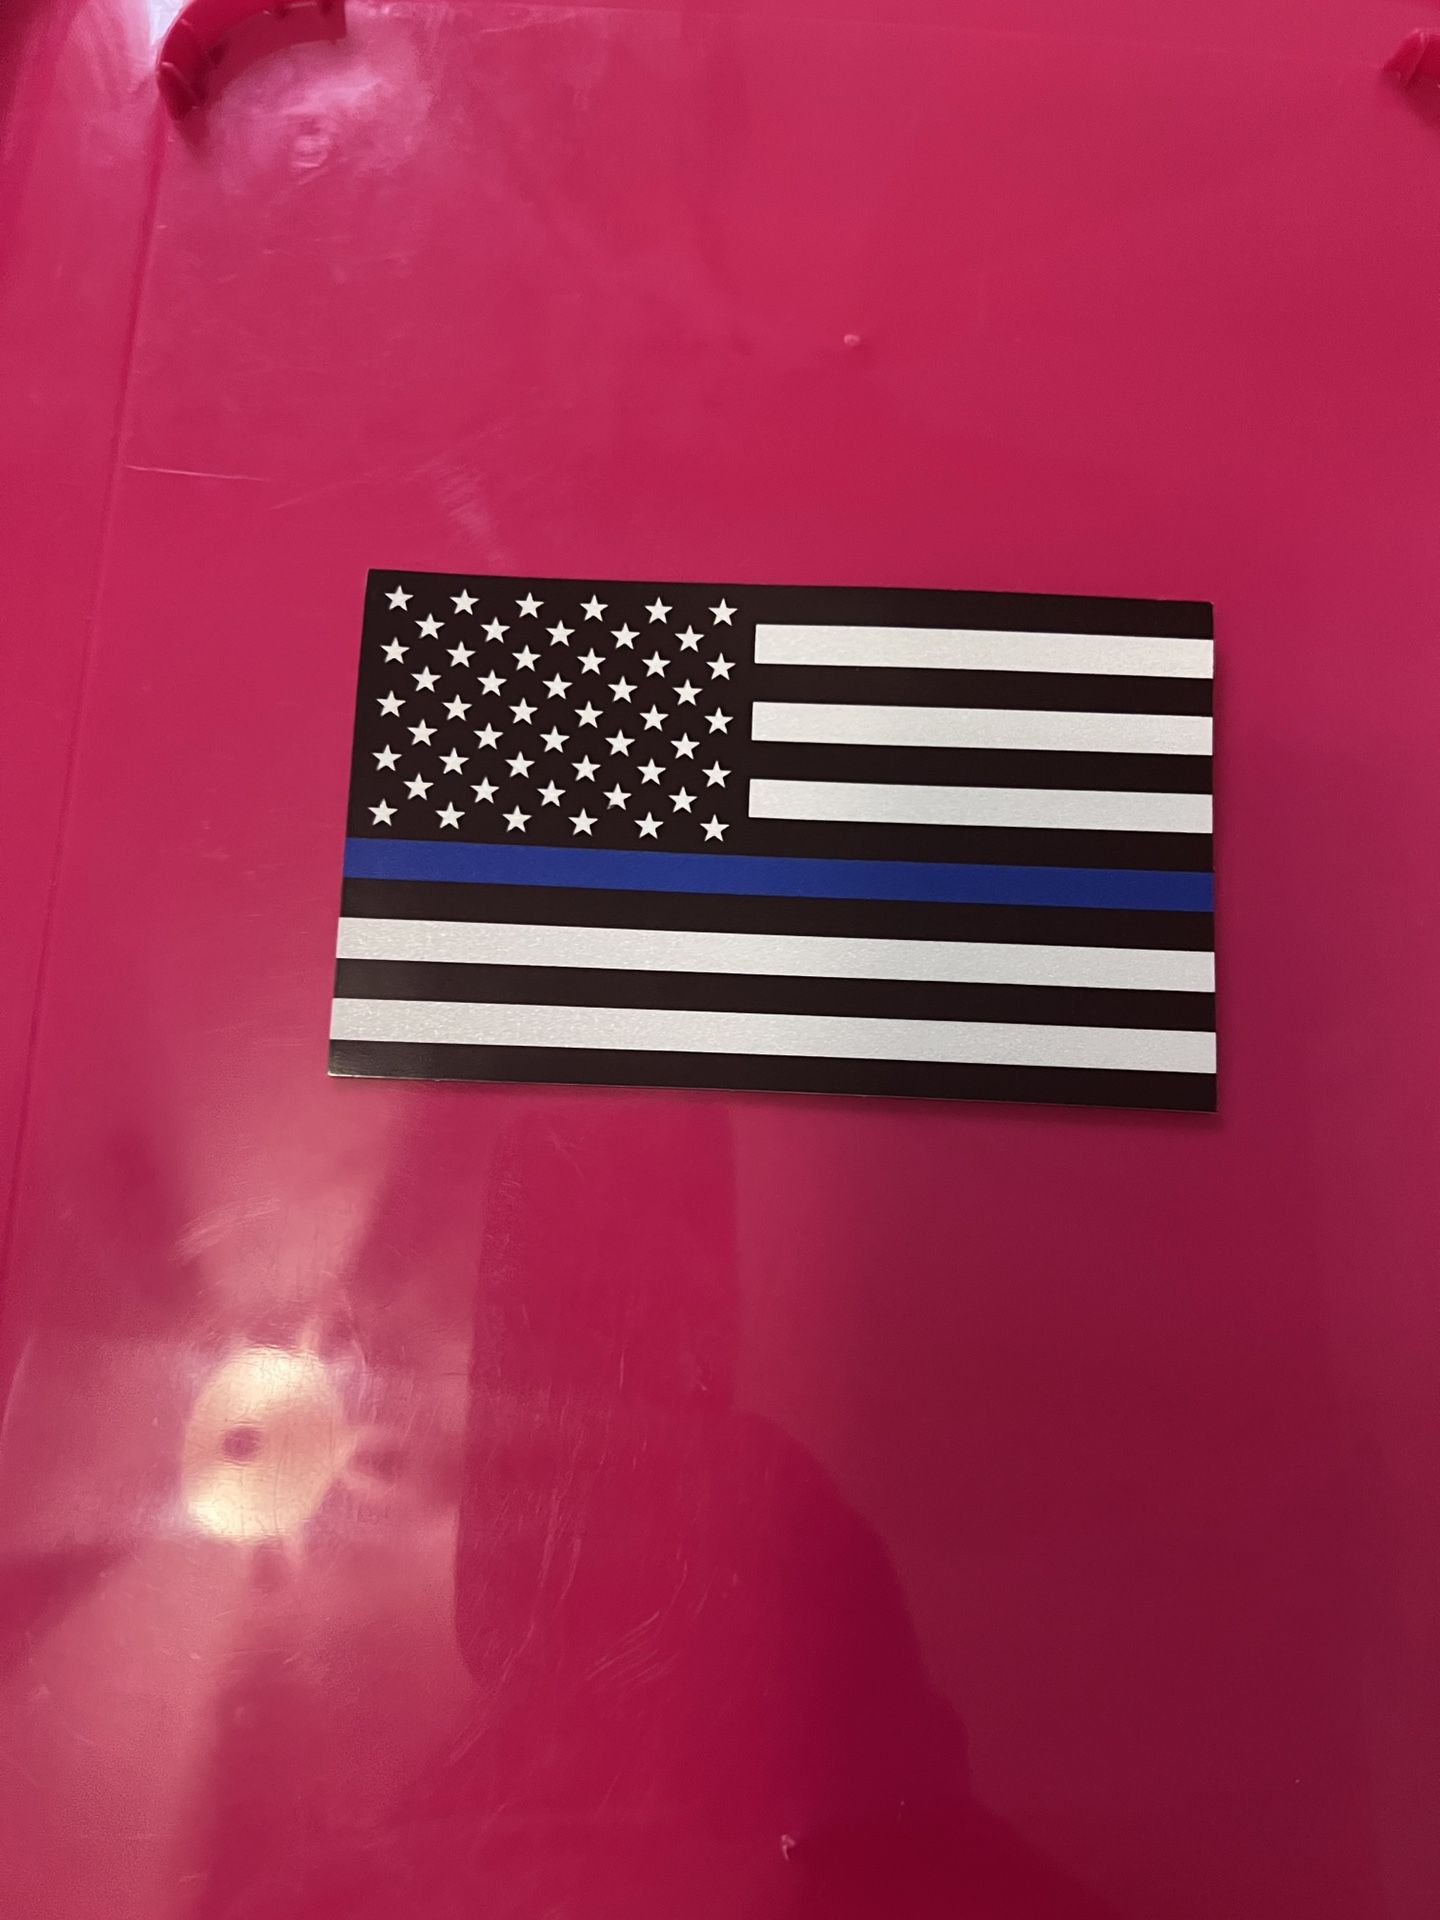 Thin Blue Line Decal Size 3”x5”